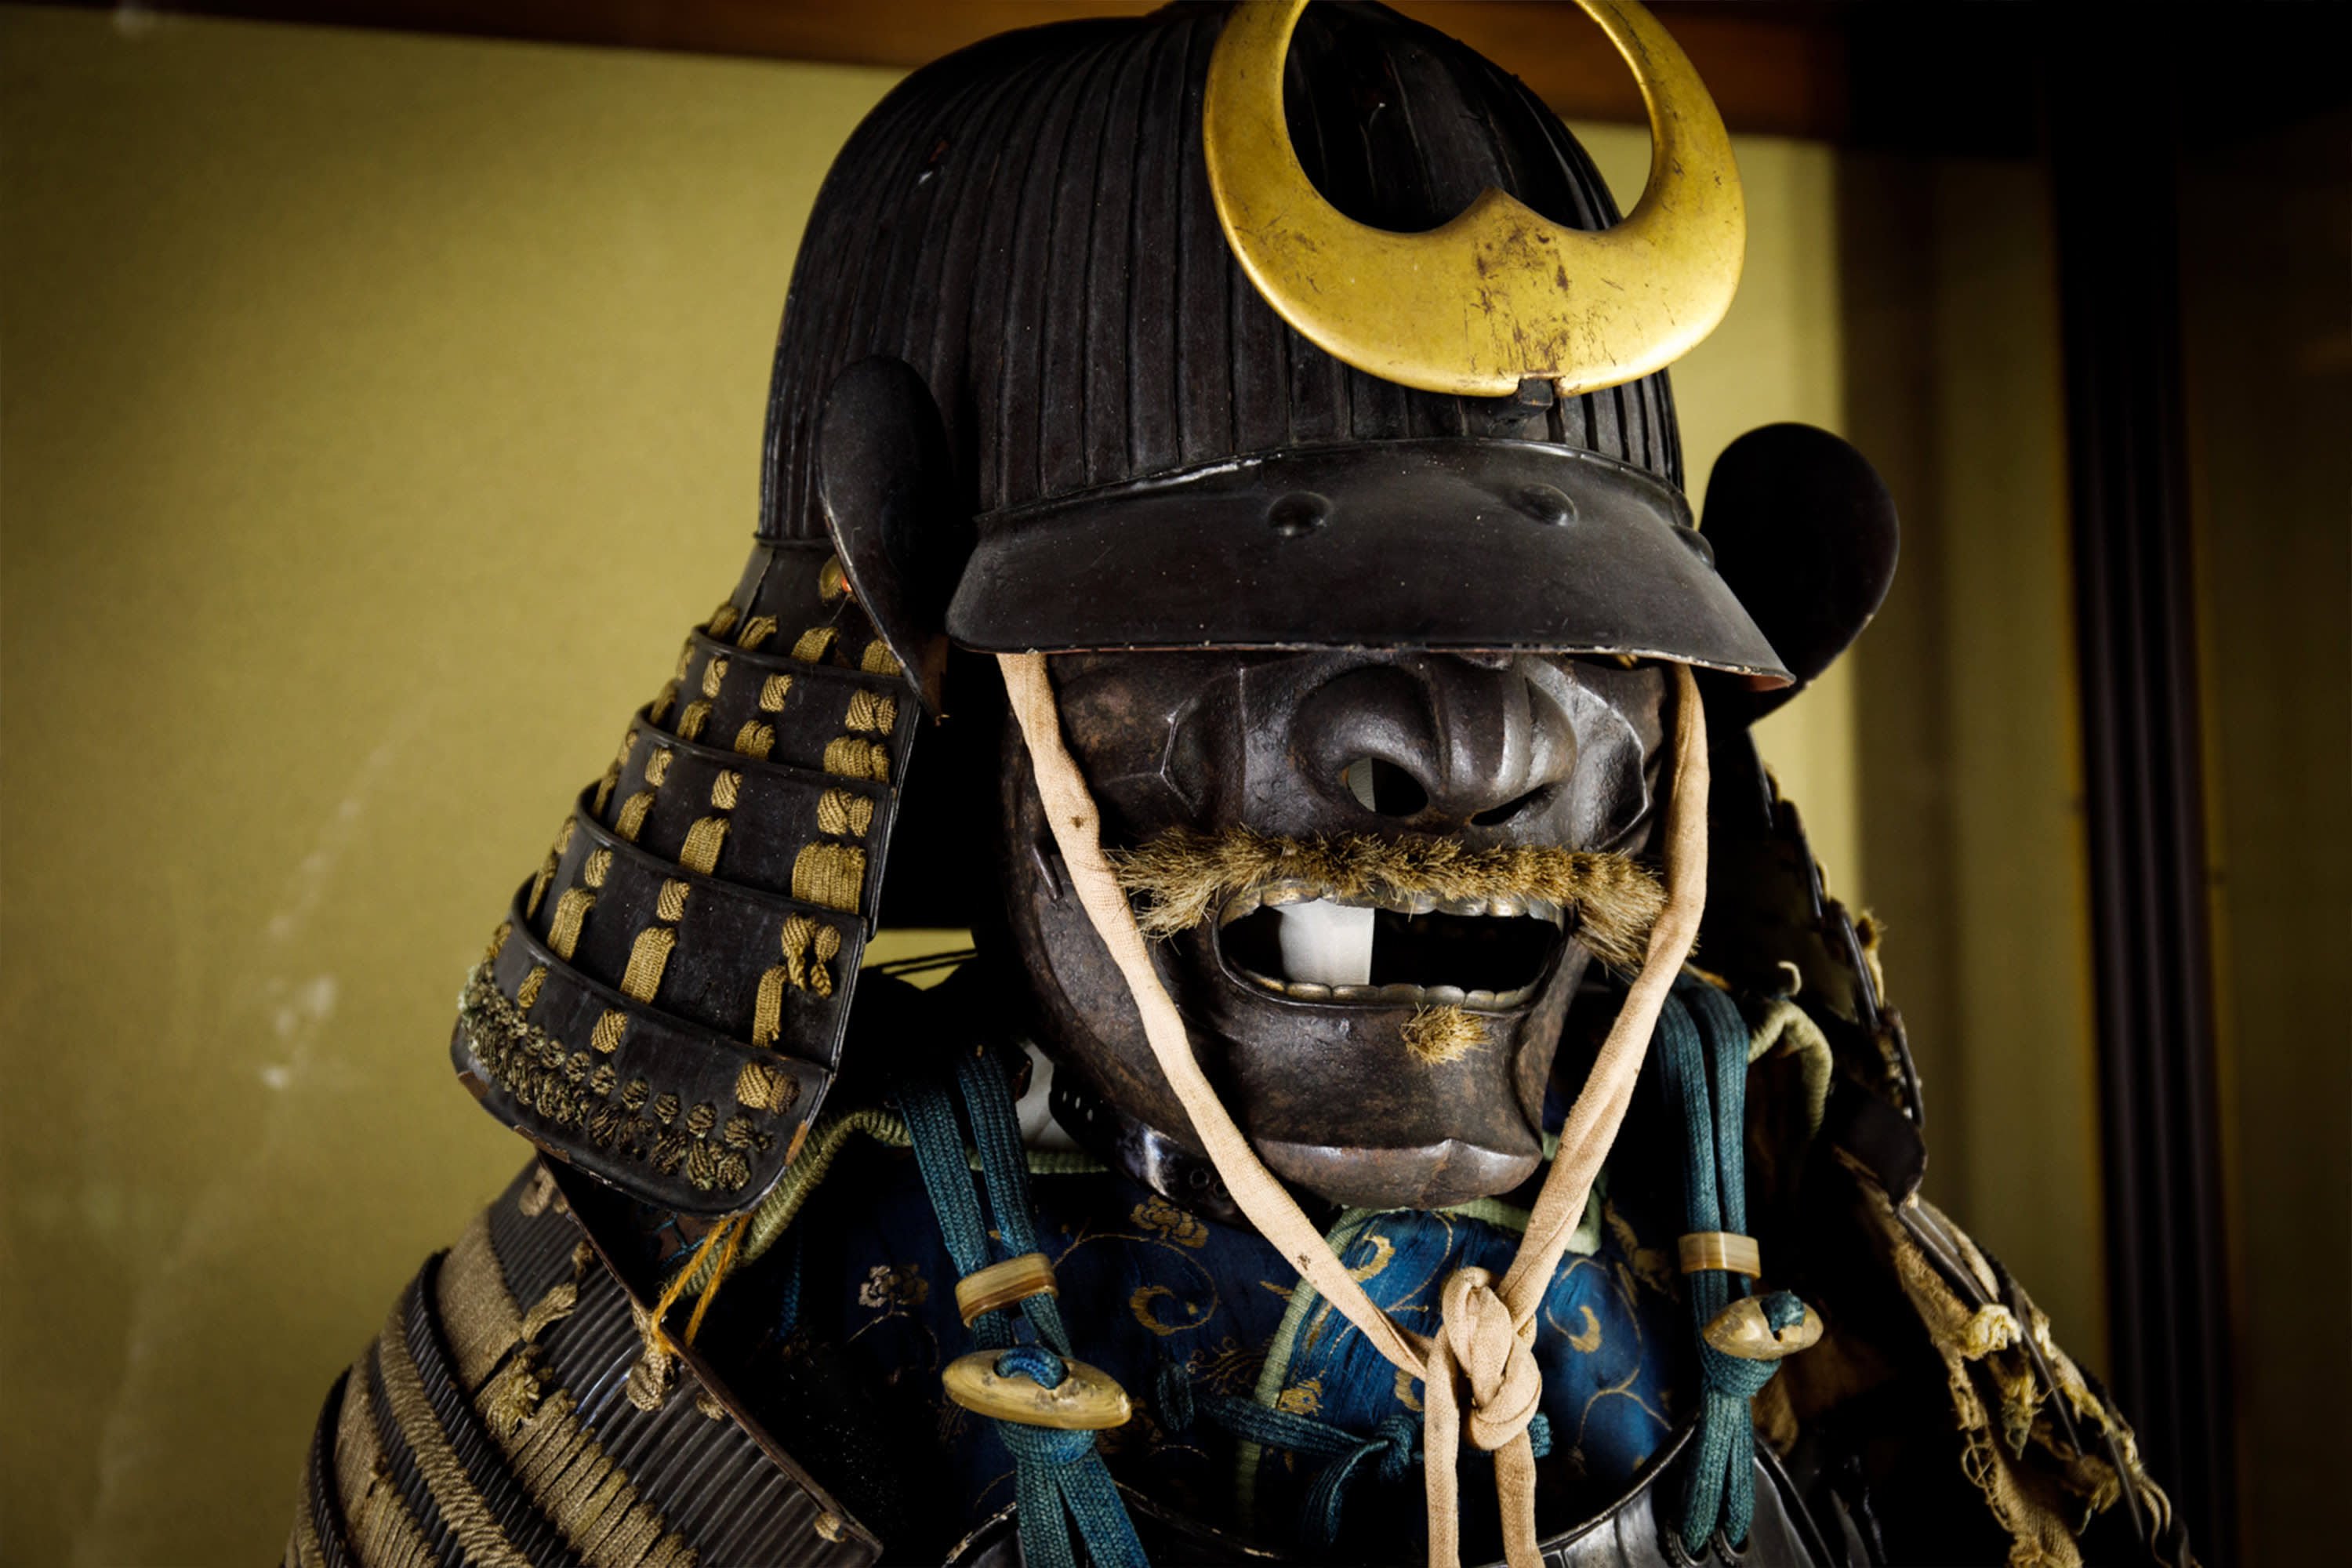 Samurai, Art, and Culture: The Power and Wealth of the Maeda Family